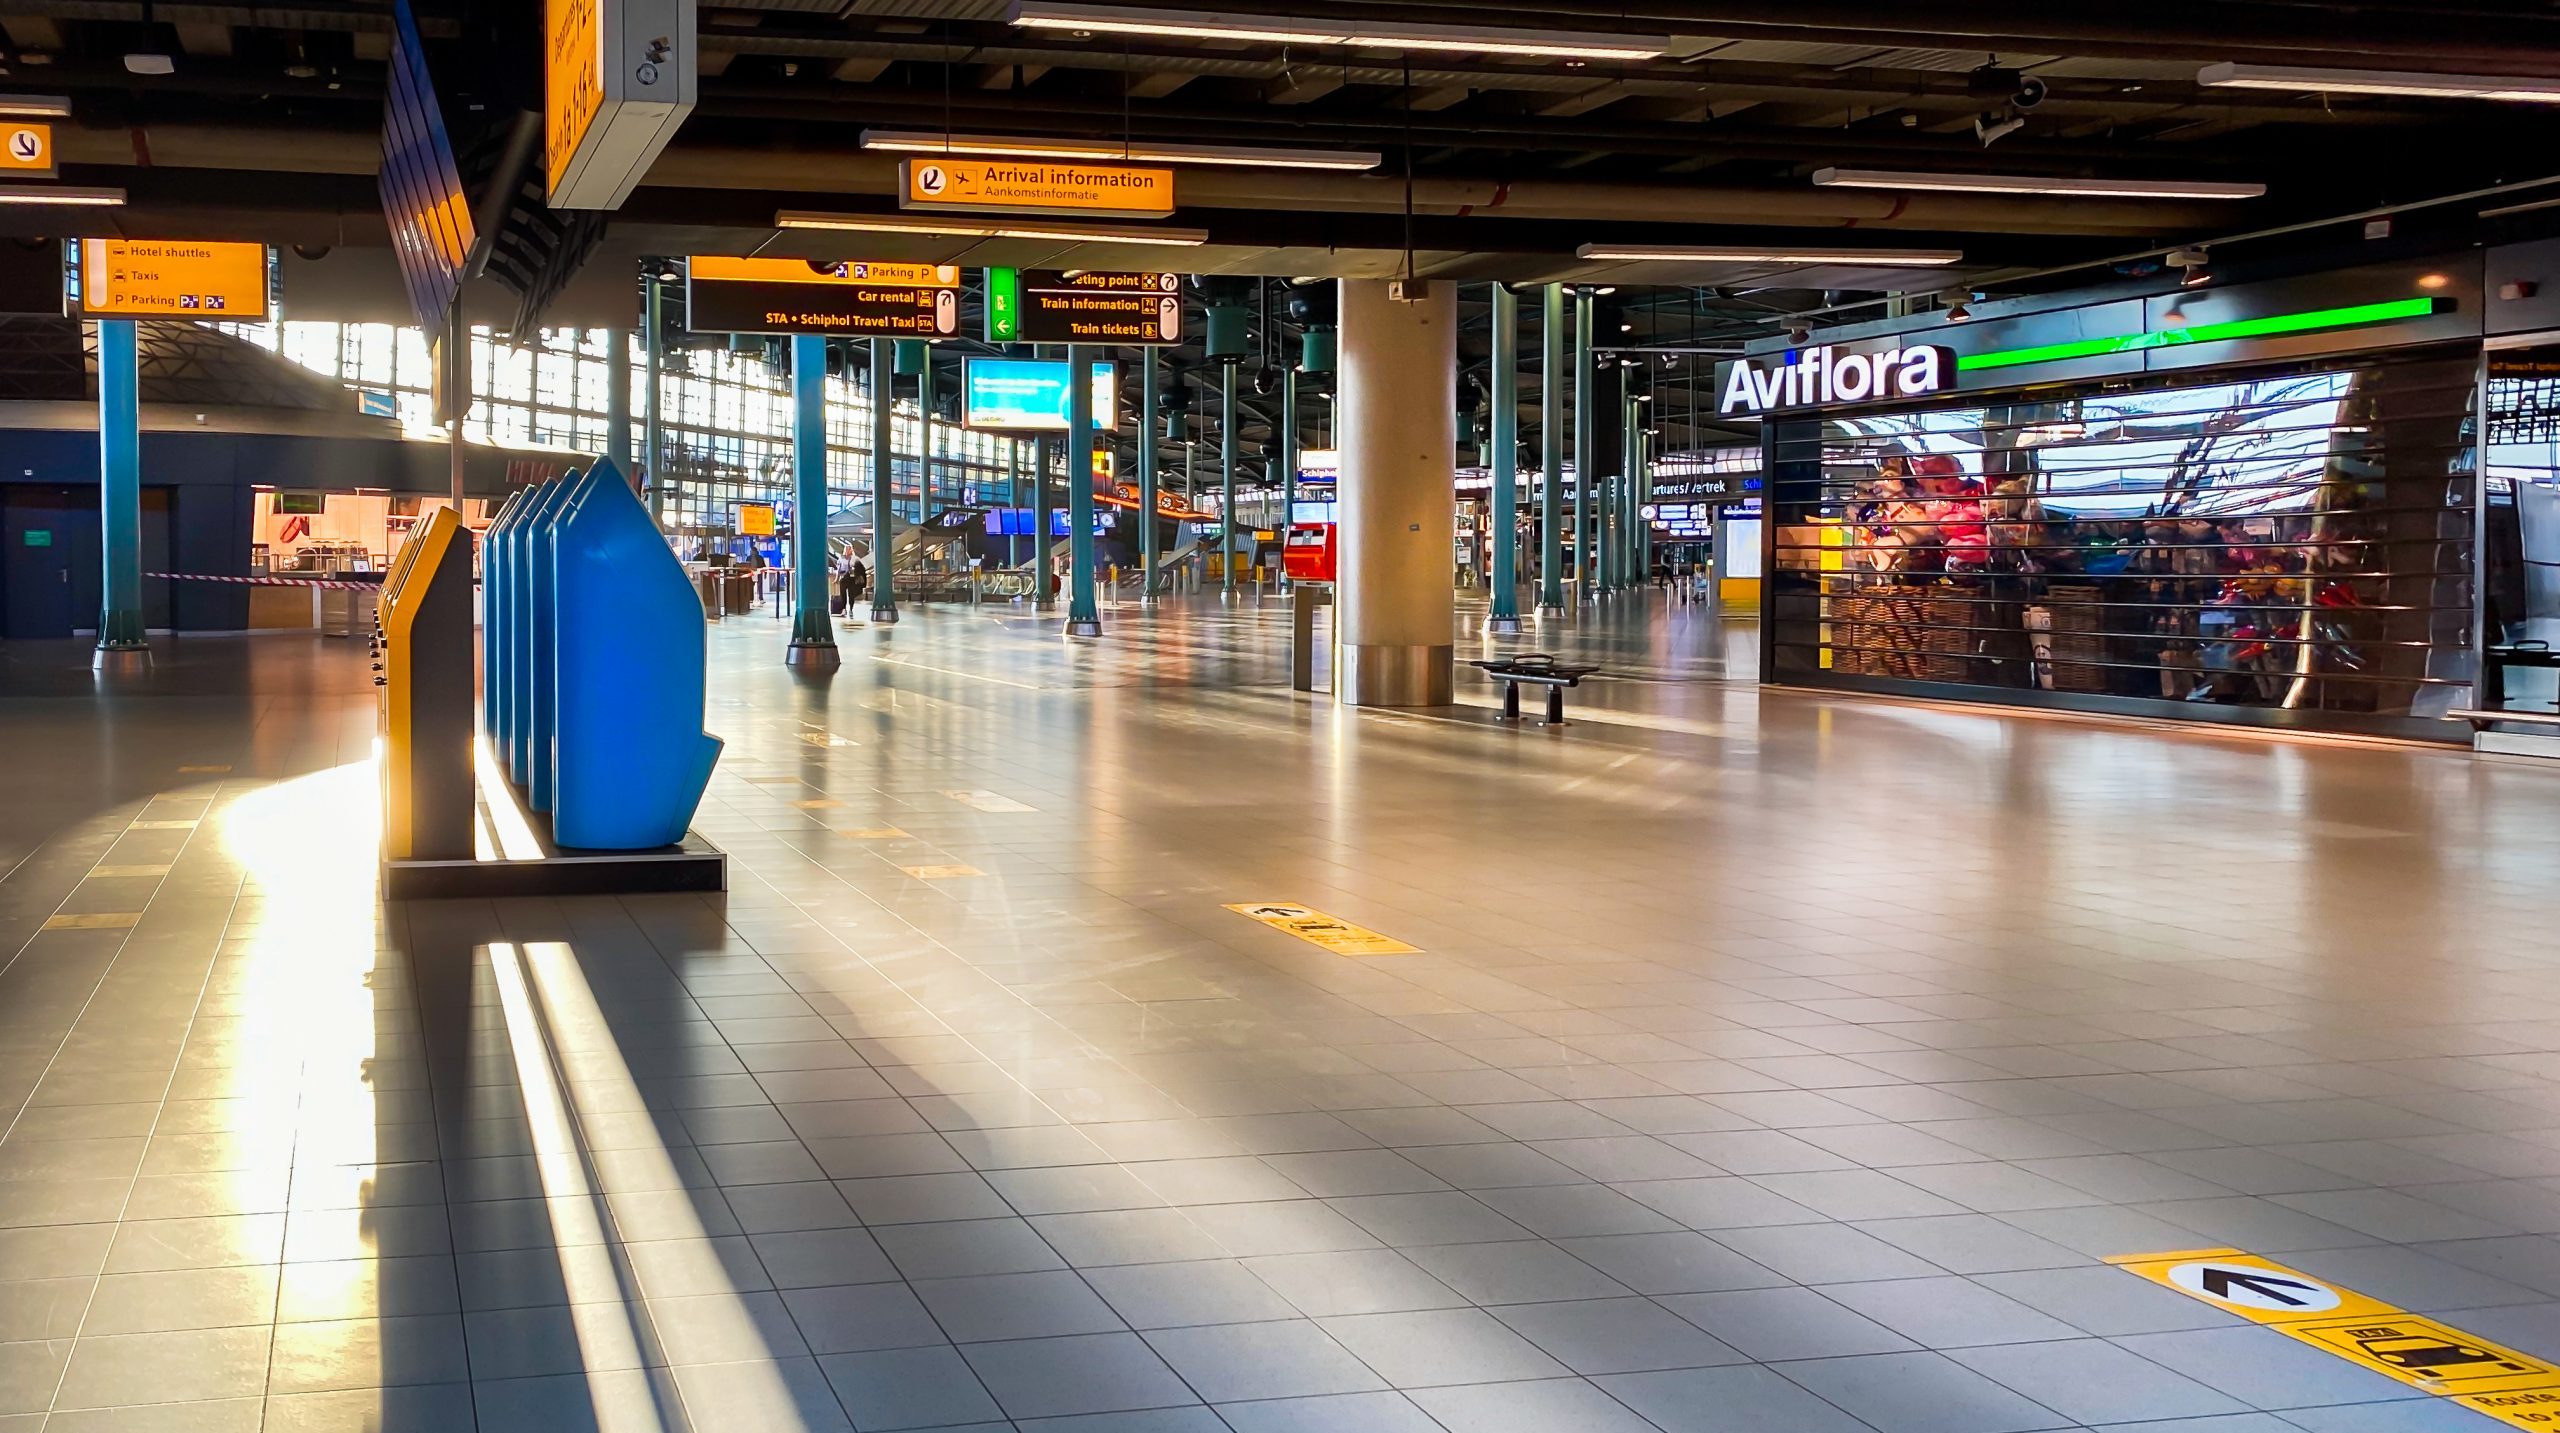 Passenger numbers at Dutch airports are dramatic